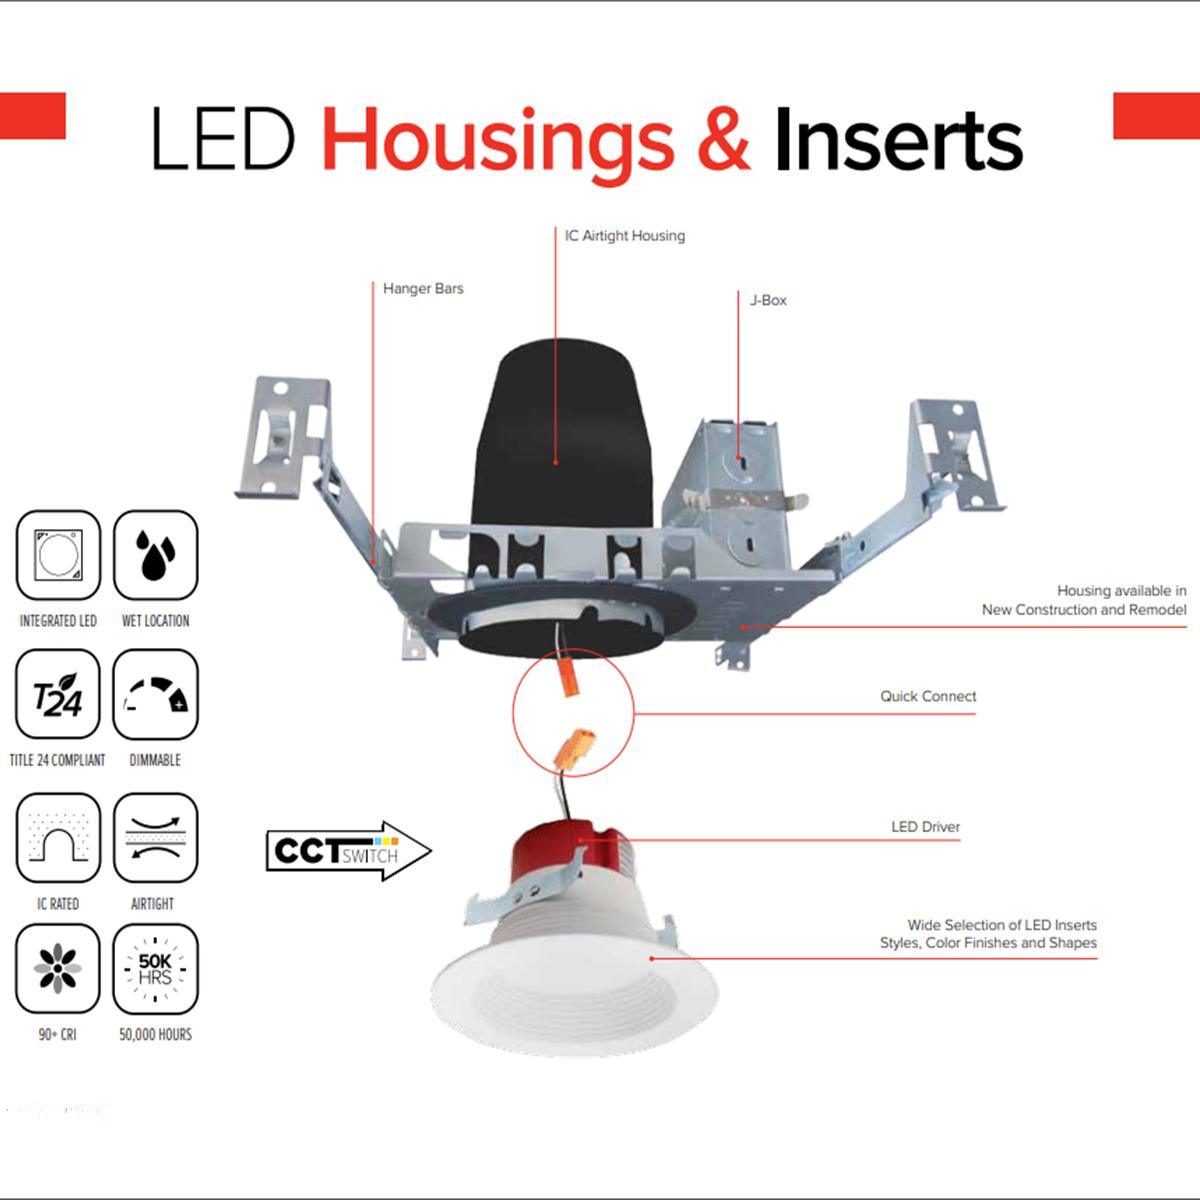 LED Shallow New Construction Housing, 5 in, IC Air-Tight, Quick Connect, 120V - Bees Lighting